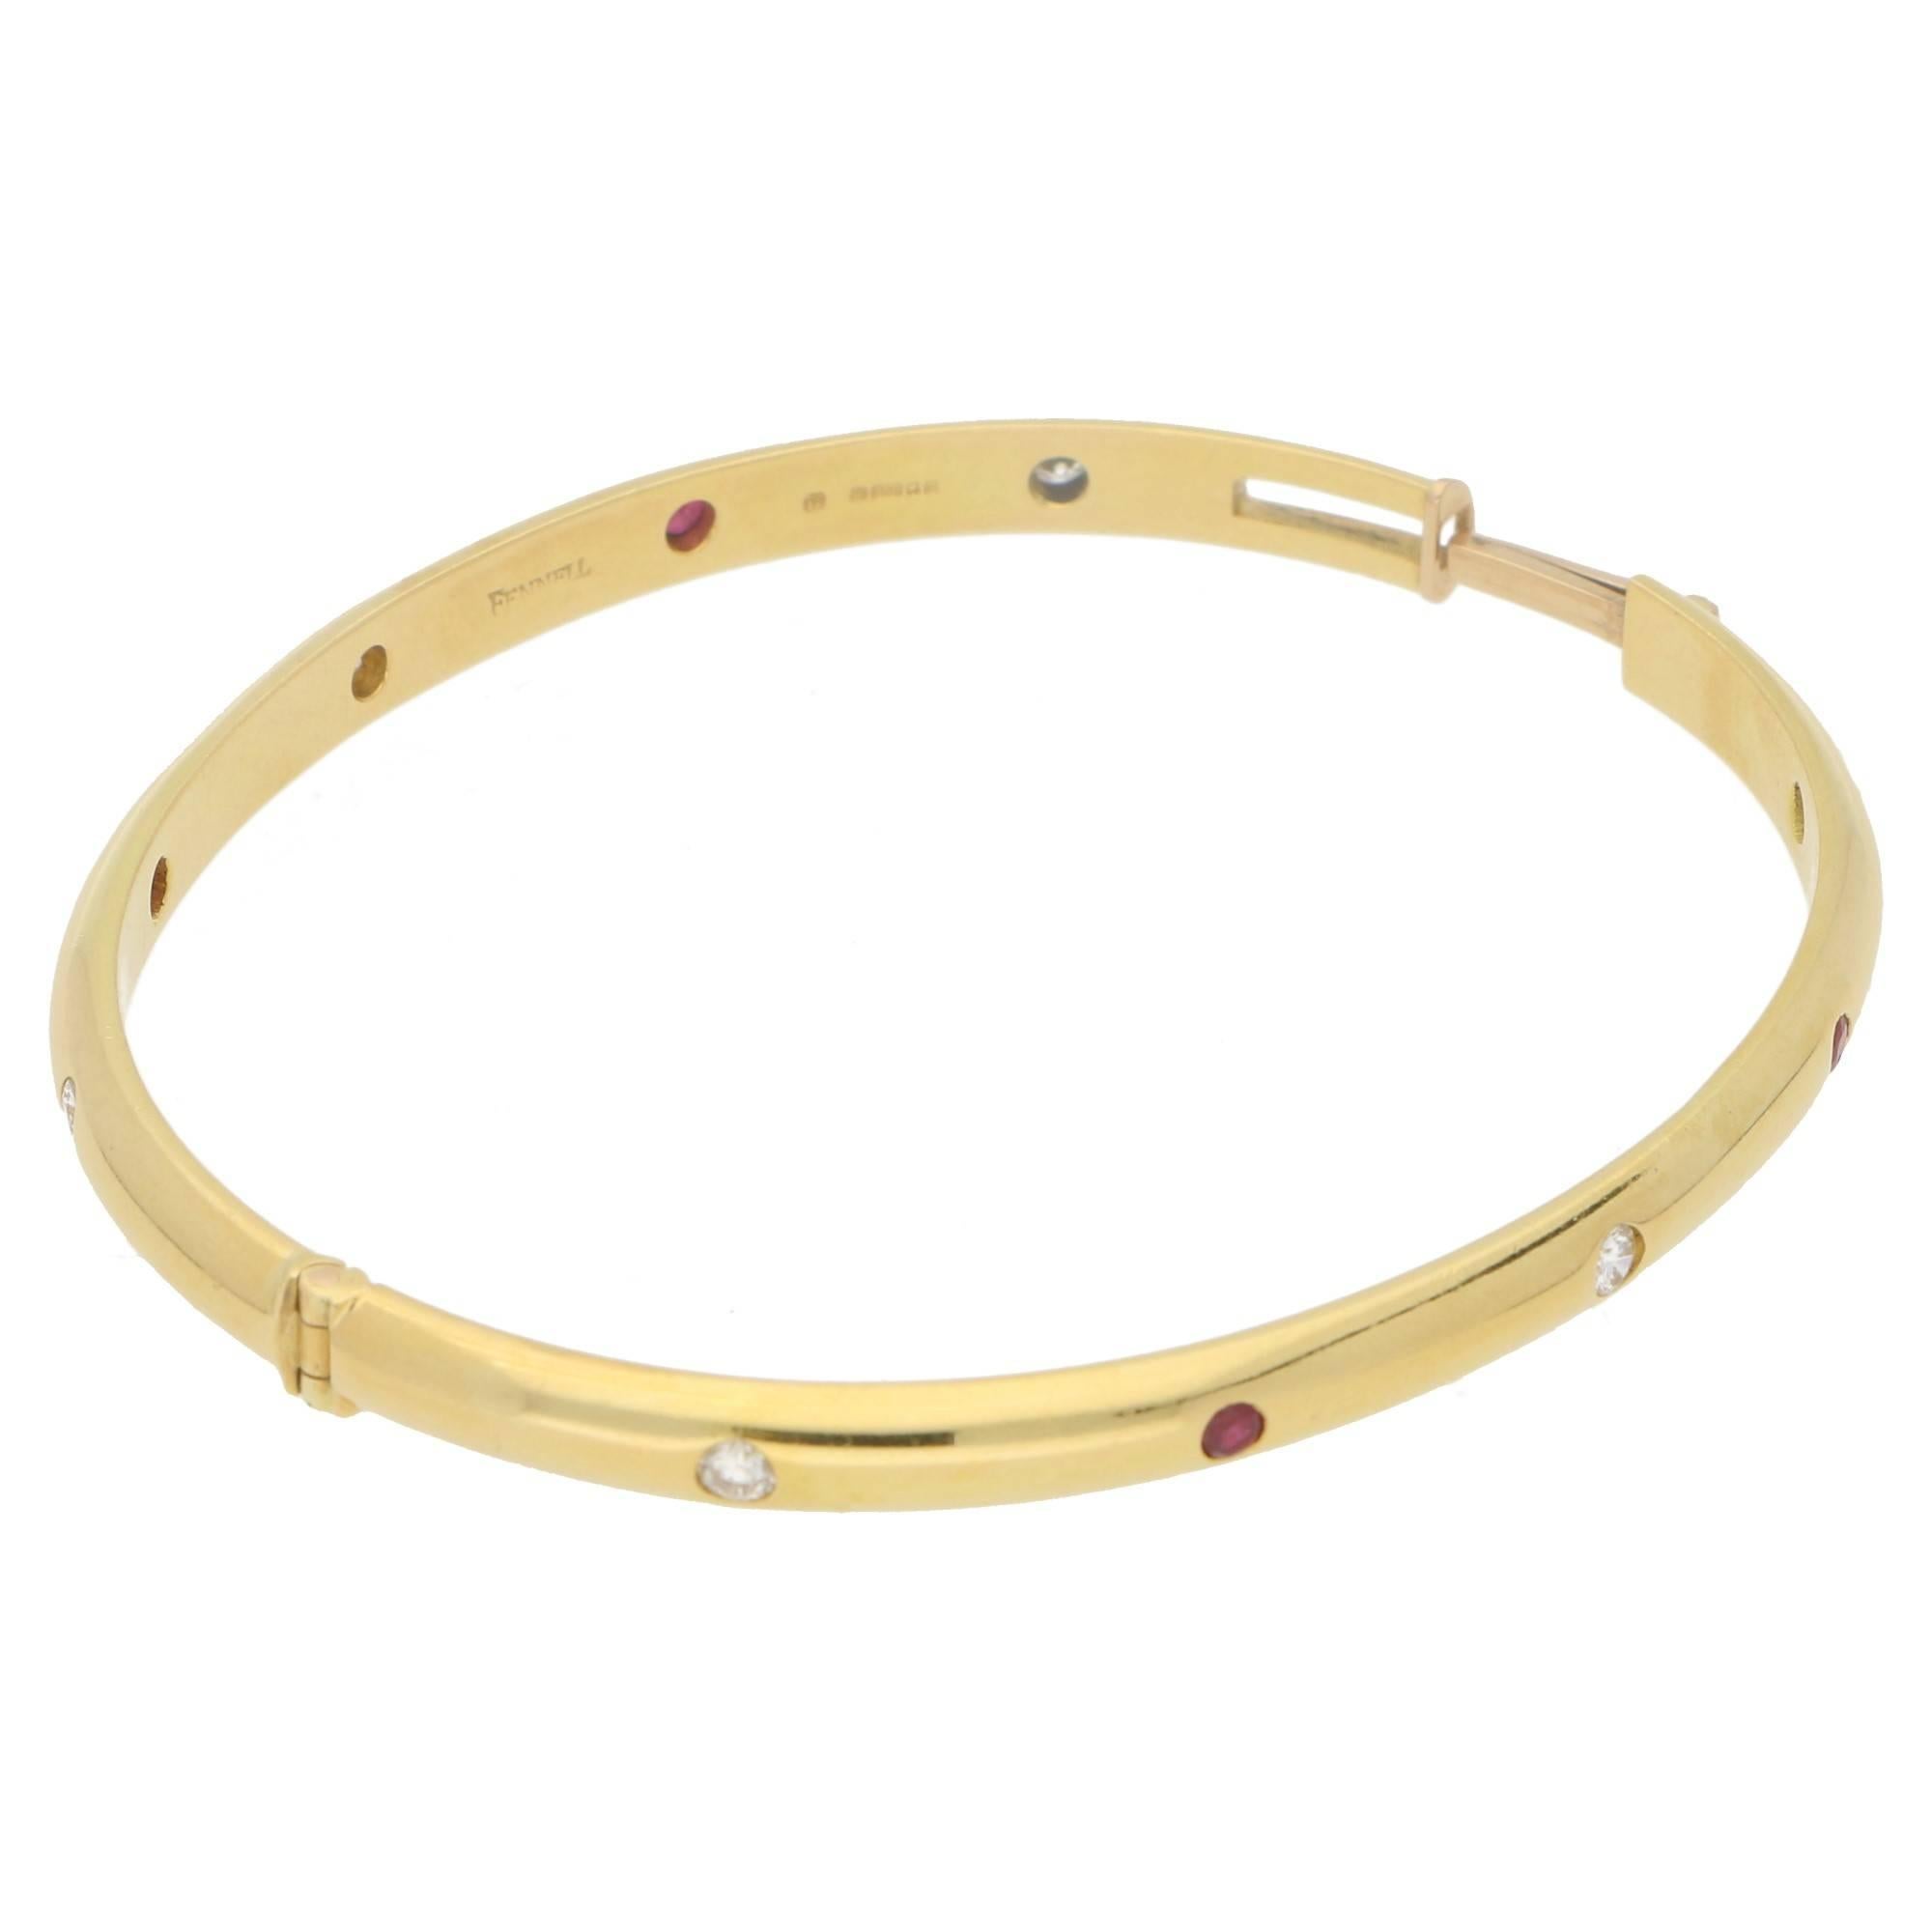 A stunning 18ct yellow gold Theo Fennell ruby and diamond set hinged bangle. With six round brilliant cut diamonds and four round faceted rubies drop set alternating into the bangle. Estimated total ruby weight: 0.50cts. Estimated total diamond